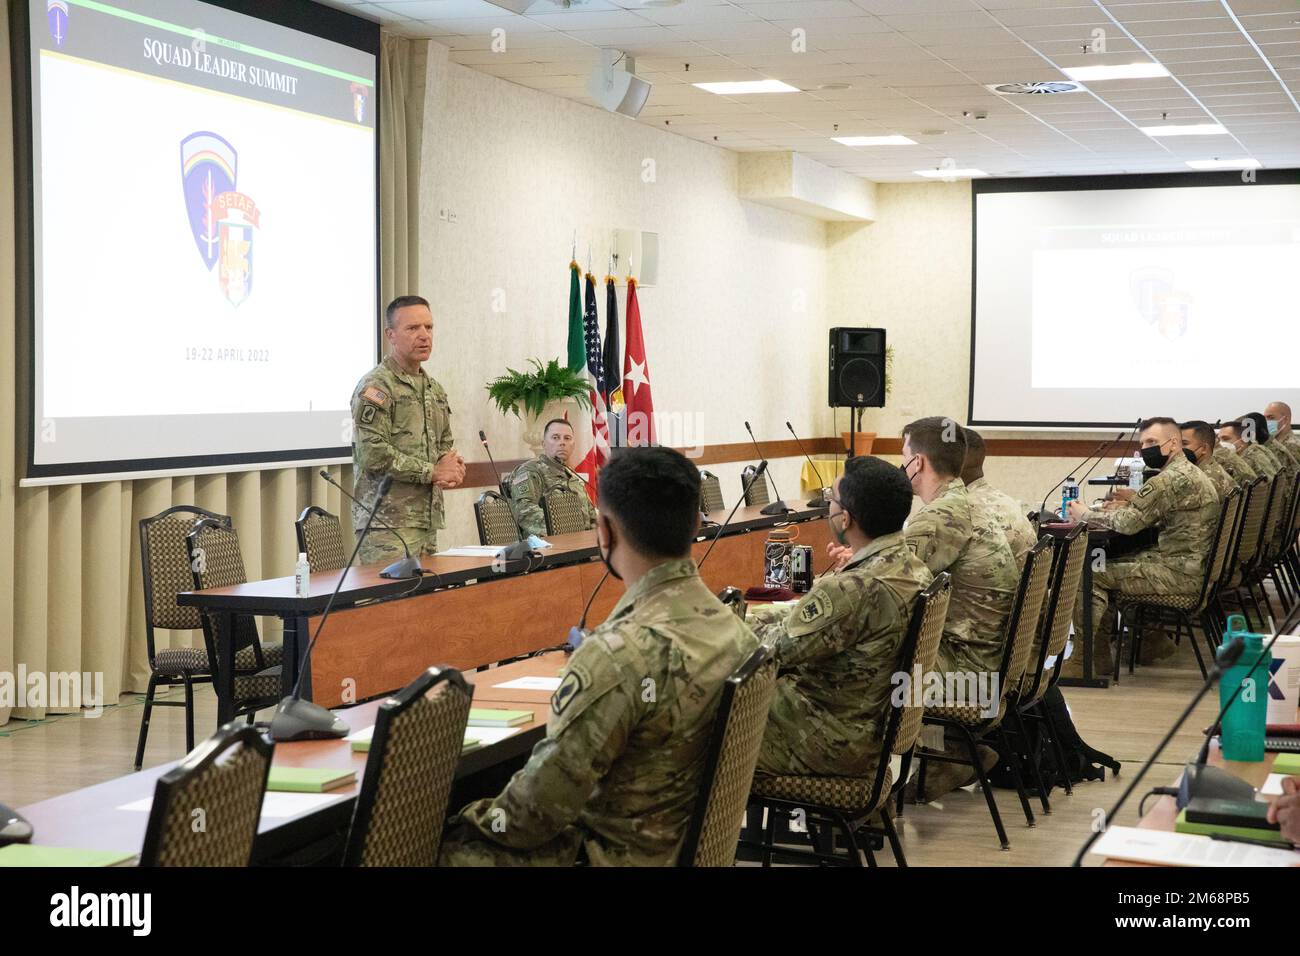 Maj. Gen. Andrew Rohling, U.S. Army Southern European Task Force, Africa commanding general, gives remarks at the start of the Squad Leader Summit on Caserma Ederle in Vicenza, Italy, April 19, 2022. The purpose of the Summit was to teach current and soon-to-be squad leaders about building effective and cohesive teams that are trained, disciplined, and fit. Stock Photo